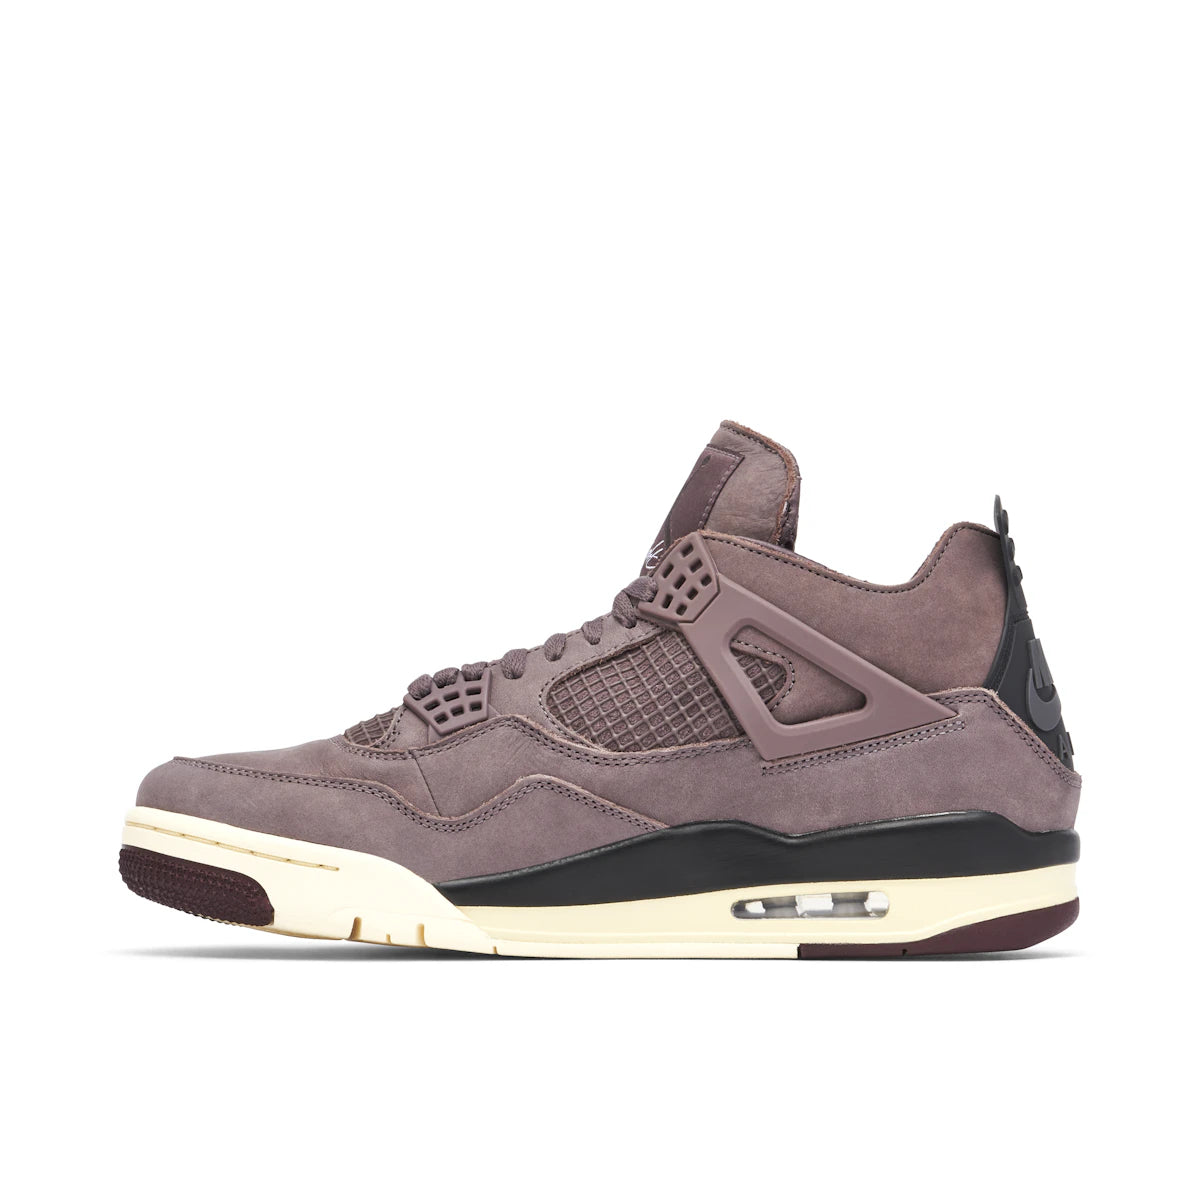 Jordan 4 Retro A Ma Maniére Violet Ore by Jordan's from £353.00